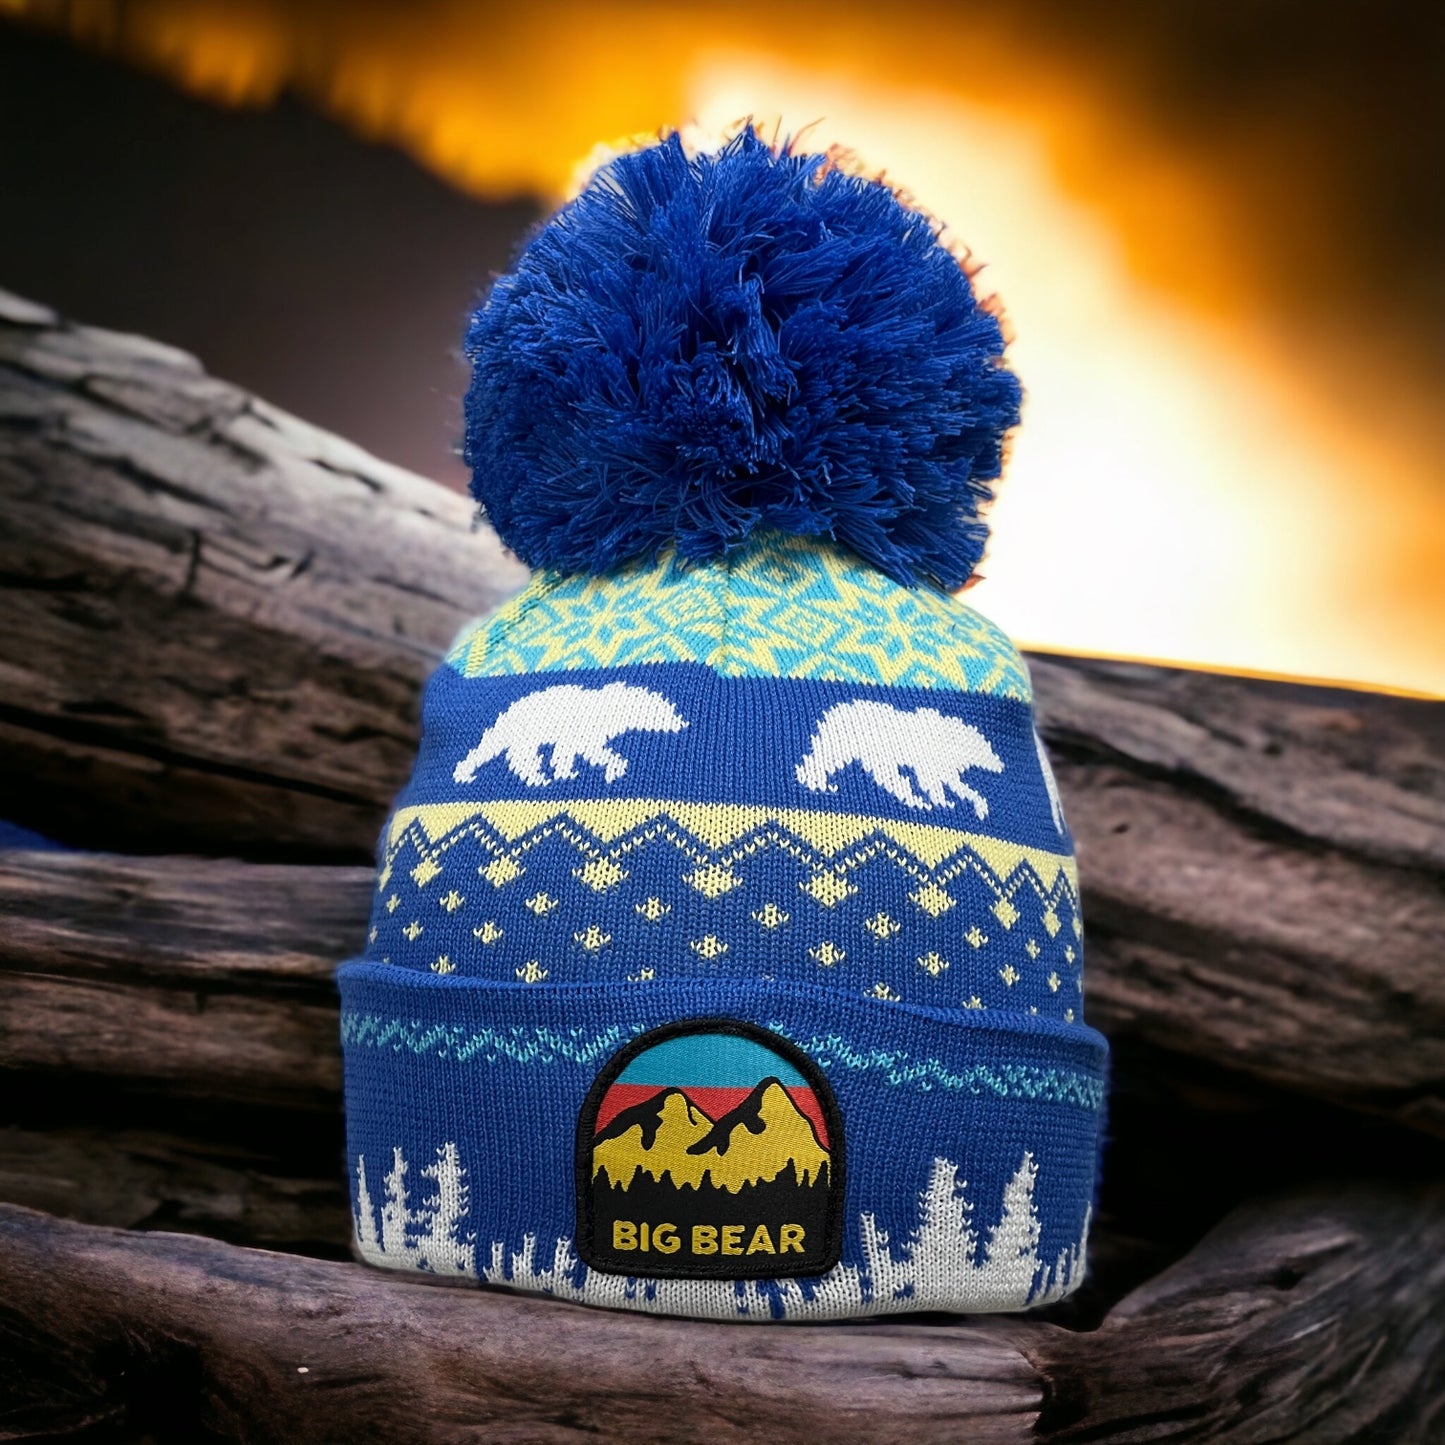 Big Bear Logo Patch w/ mountains and trees. Mixed Blue and yellow patterns throughout the beanie w/ white polar bears